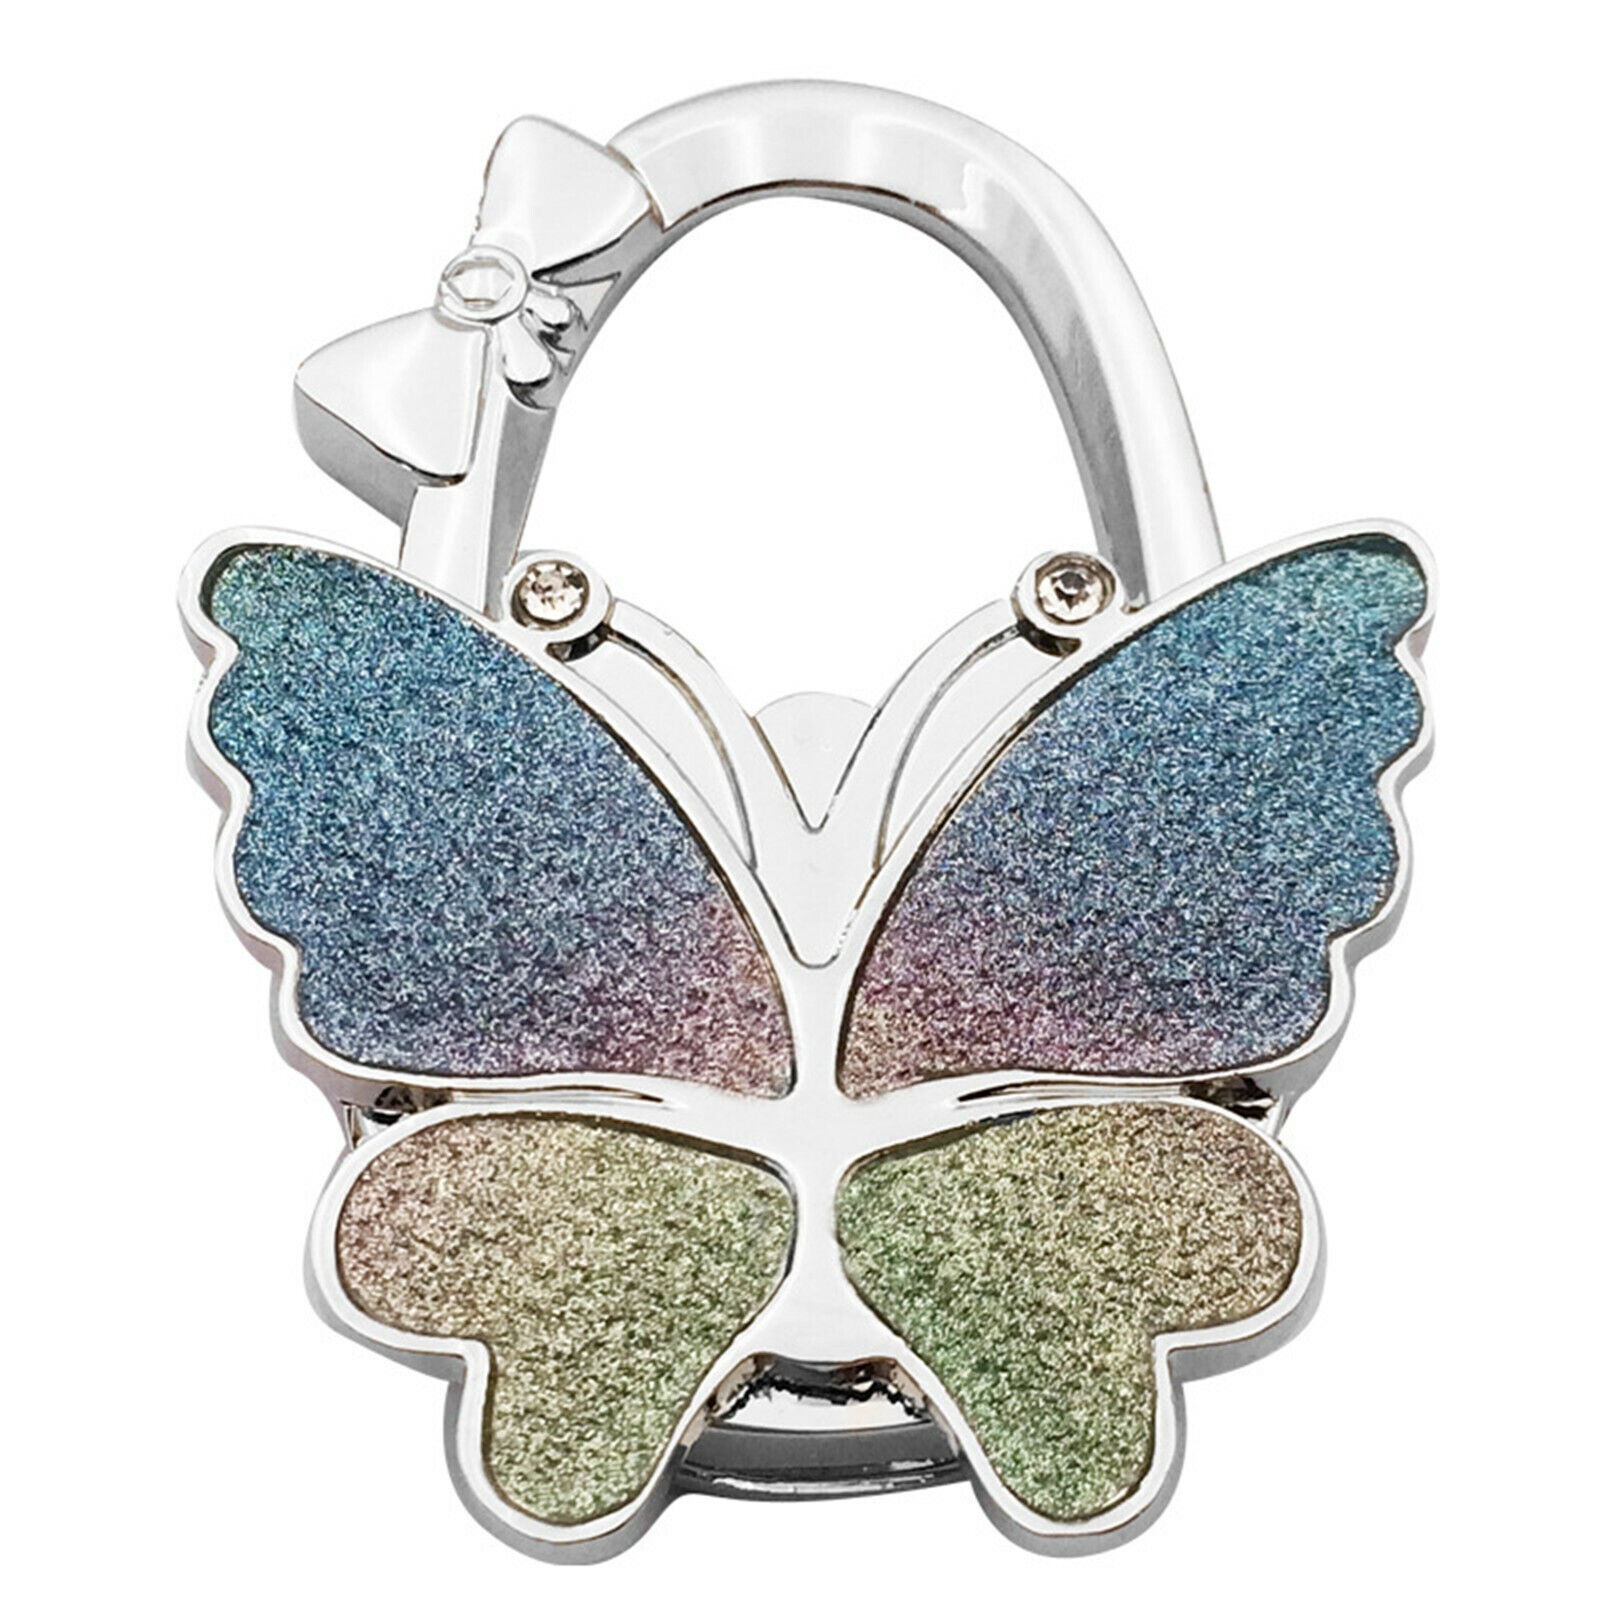 Crystalize Colourful Butterfly Handbag Hook